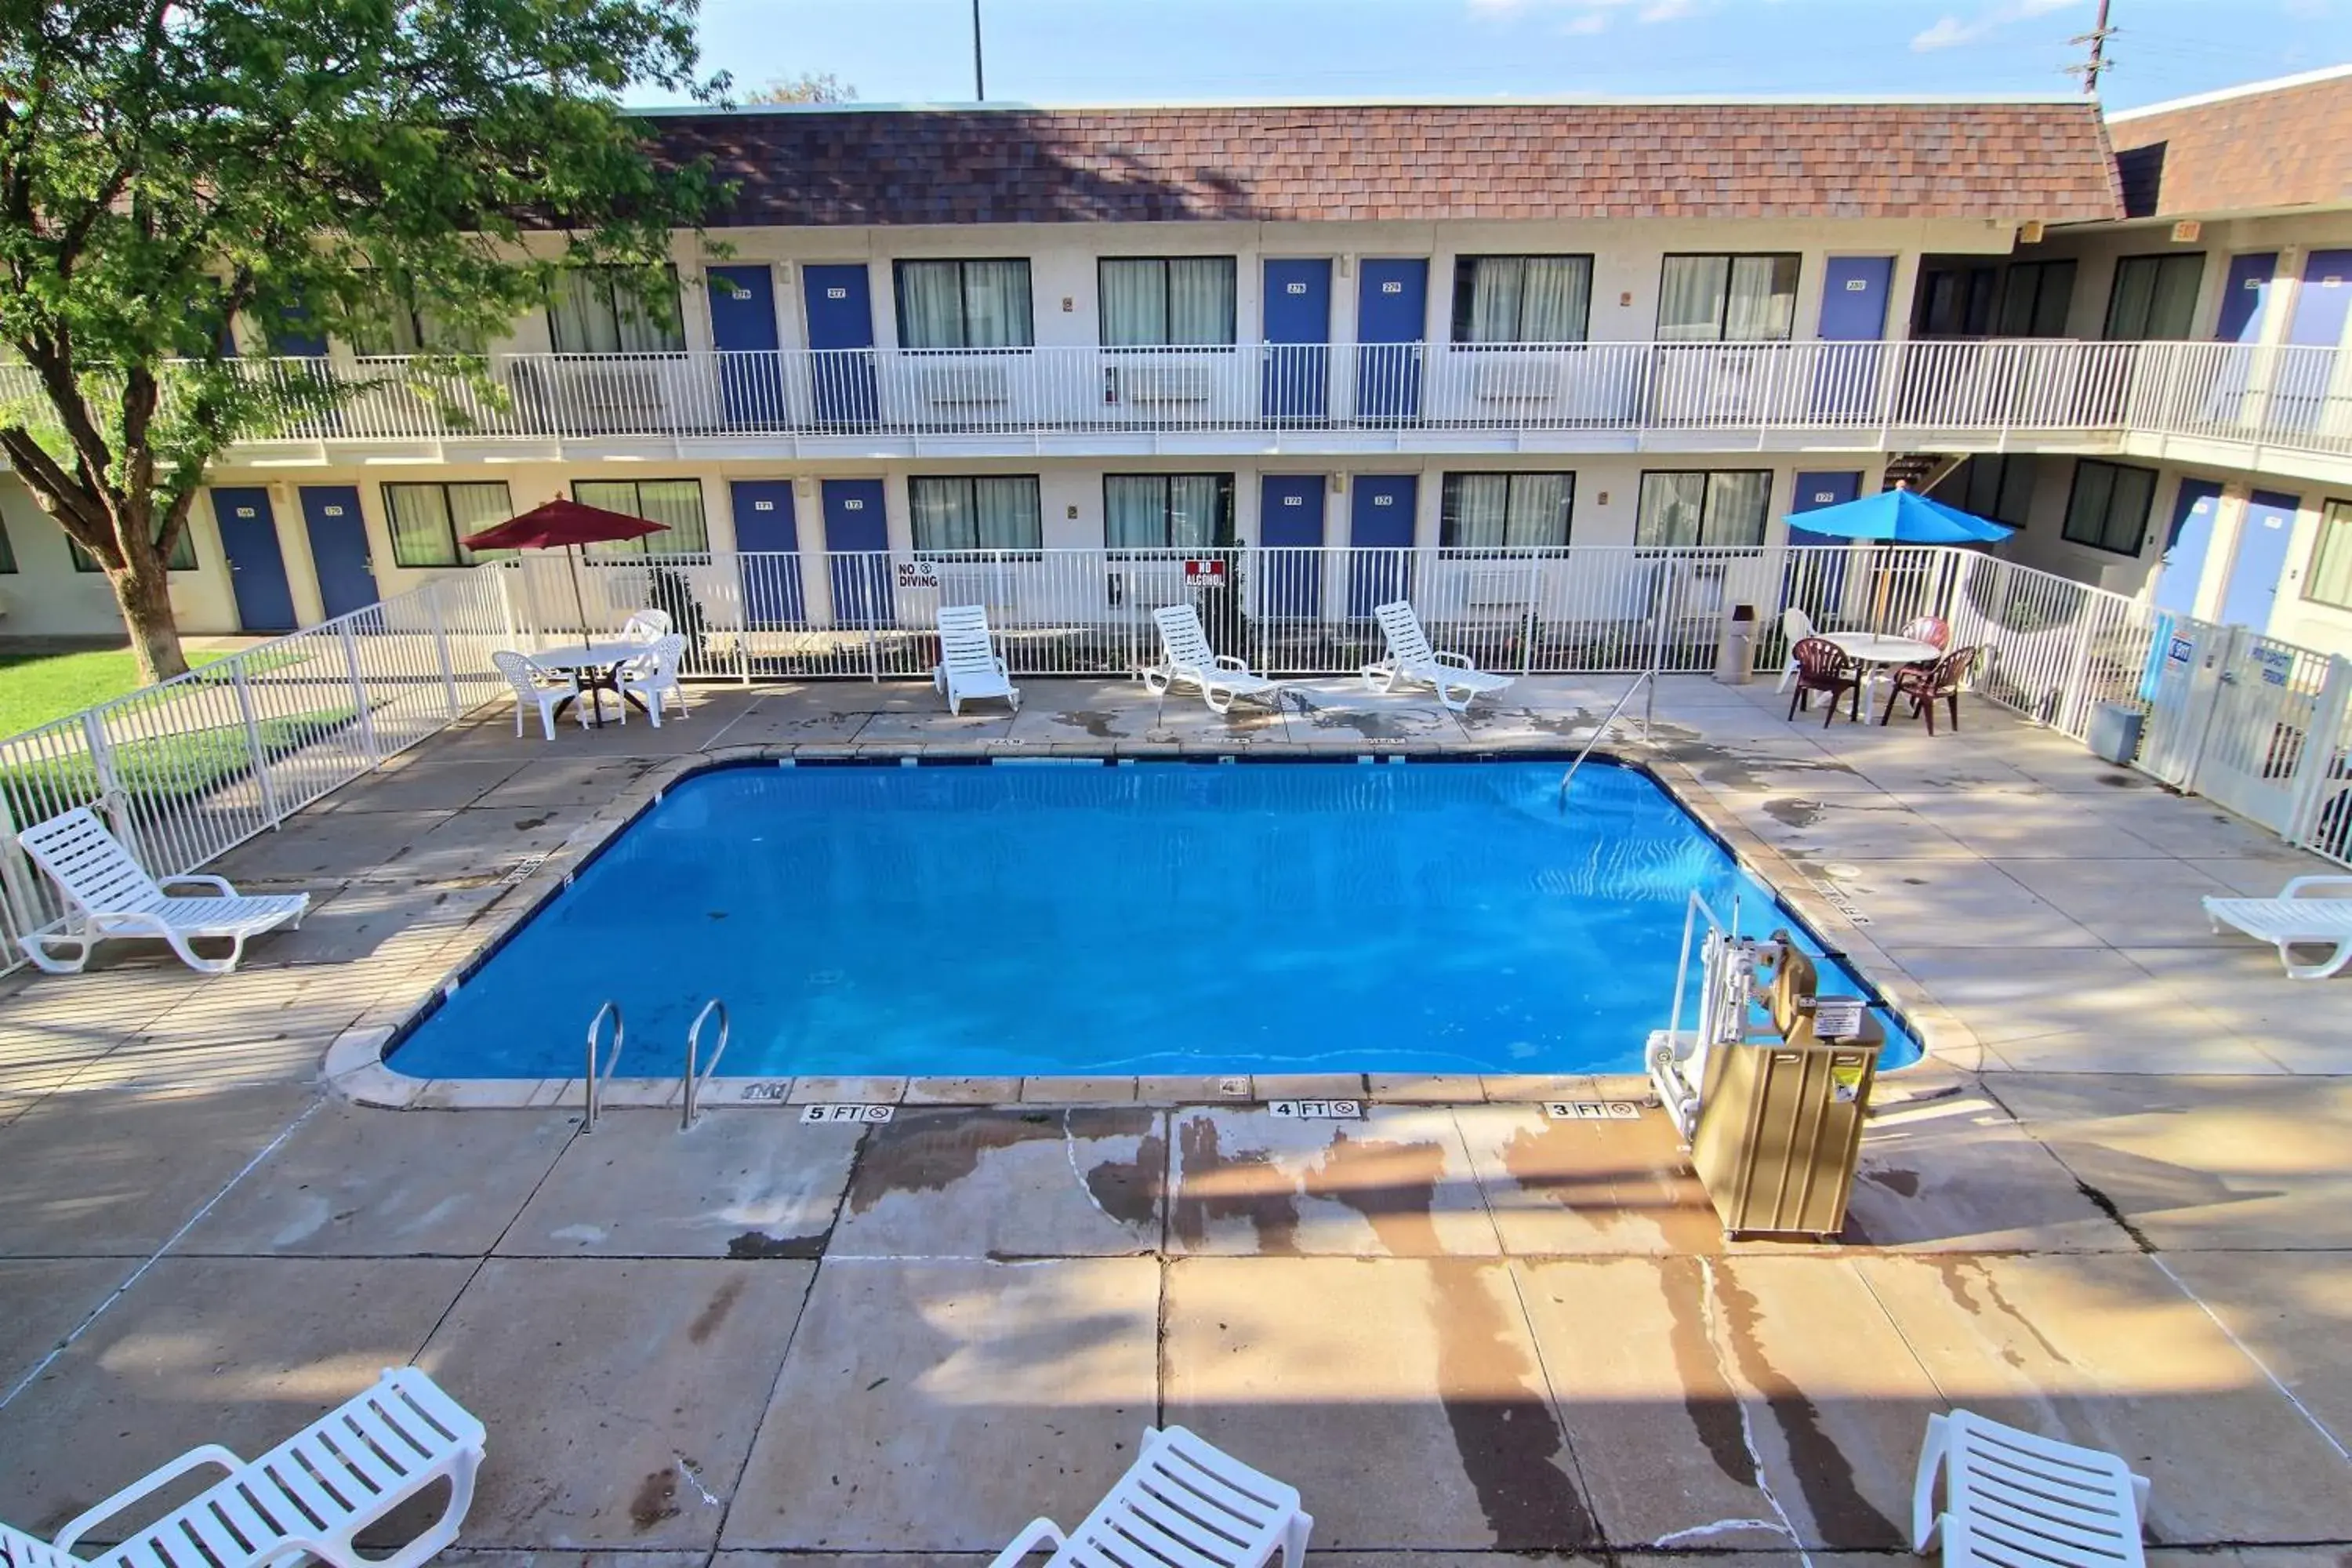 Property building, Pool View in Motel 6-Lubbock, TX